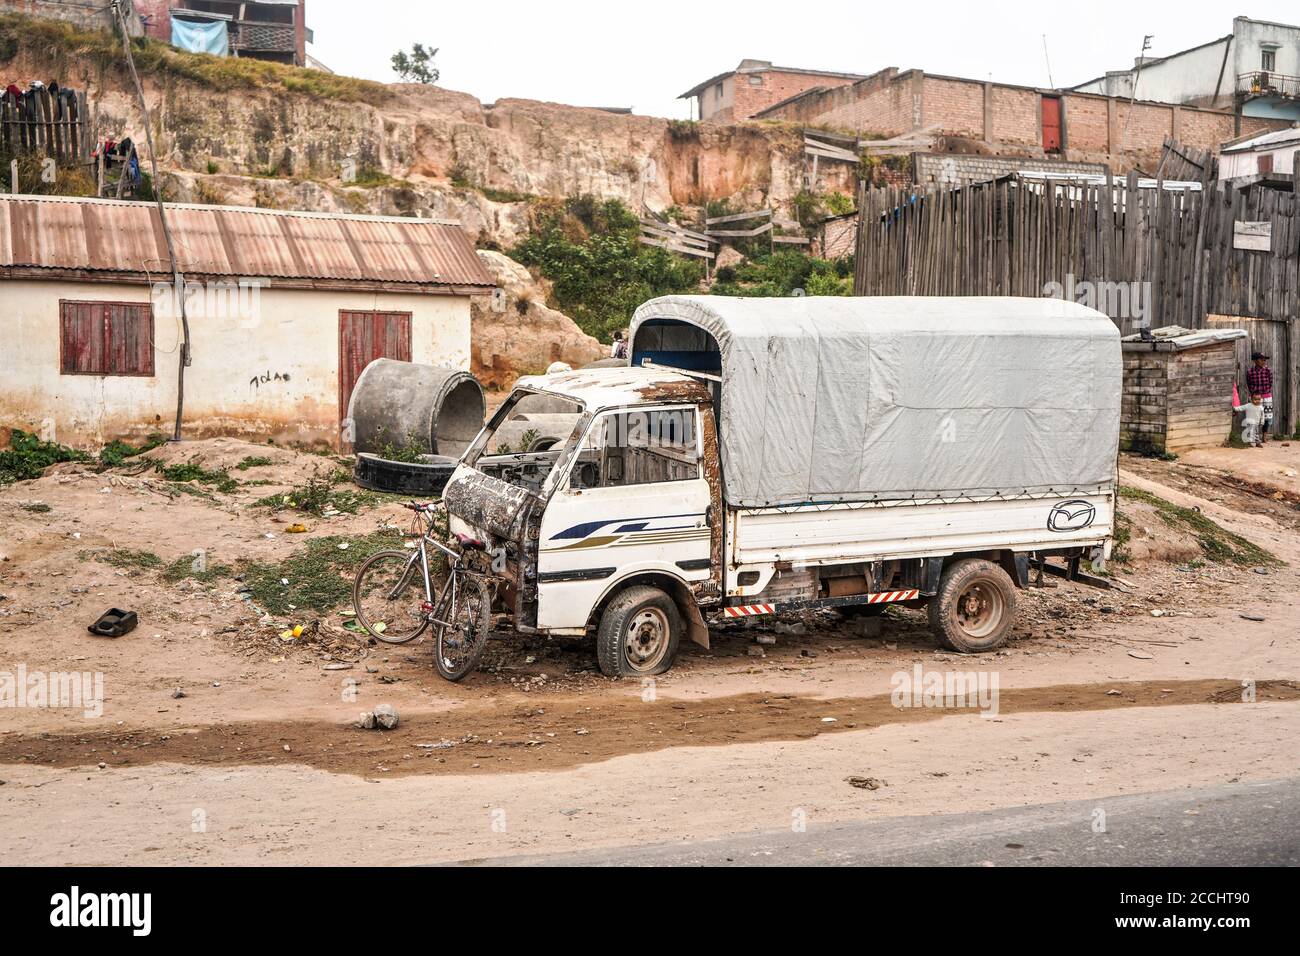 Antananarivo, Madagascar - May 07, 2019: Bicycle leaning on broken truck hood, near main road, garbage on ground - typical scene - as most parts of Ma Stock Photo